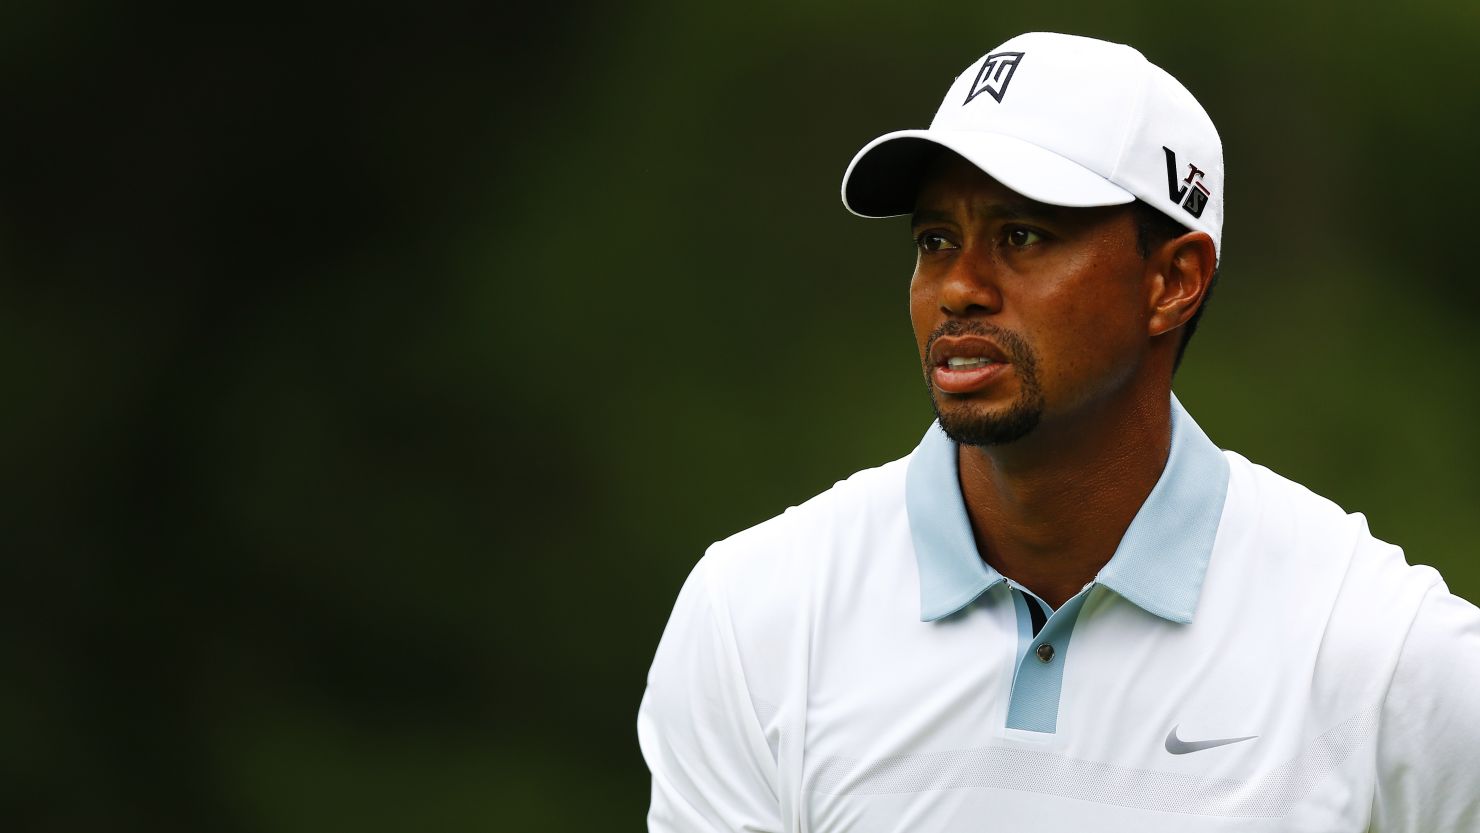 Although he didn't have a poor round, Tiger Woods couldn't match Justin Rose's 63 at the Deutsche Bank Championship. 